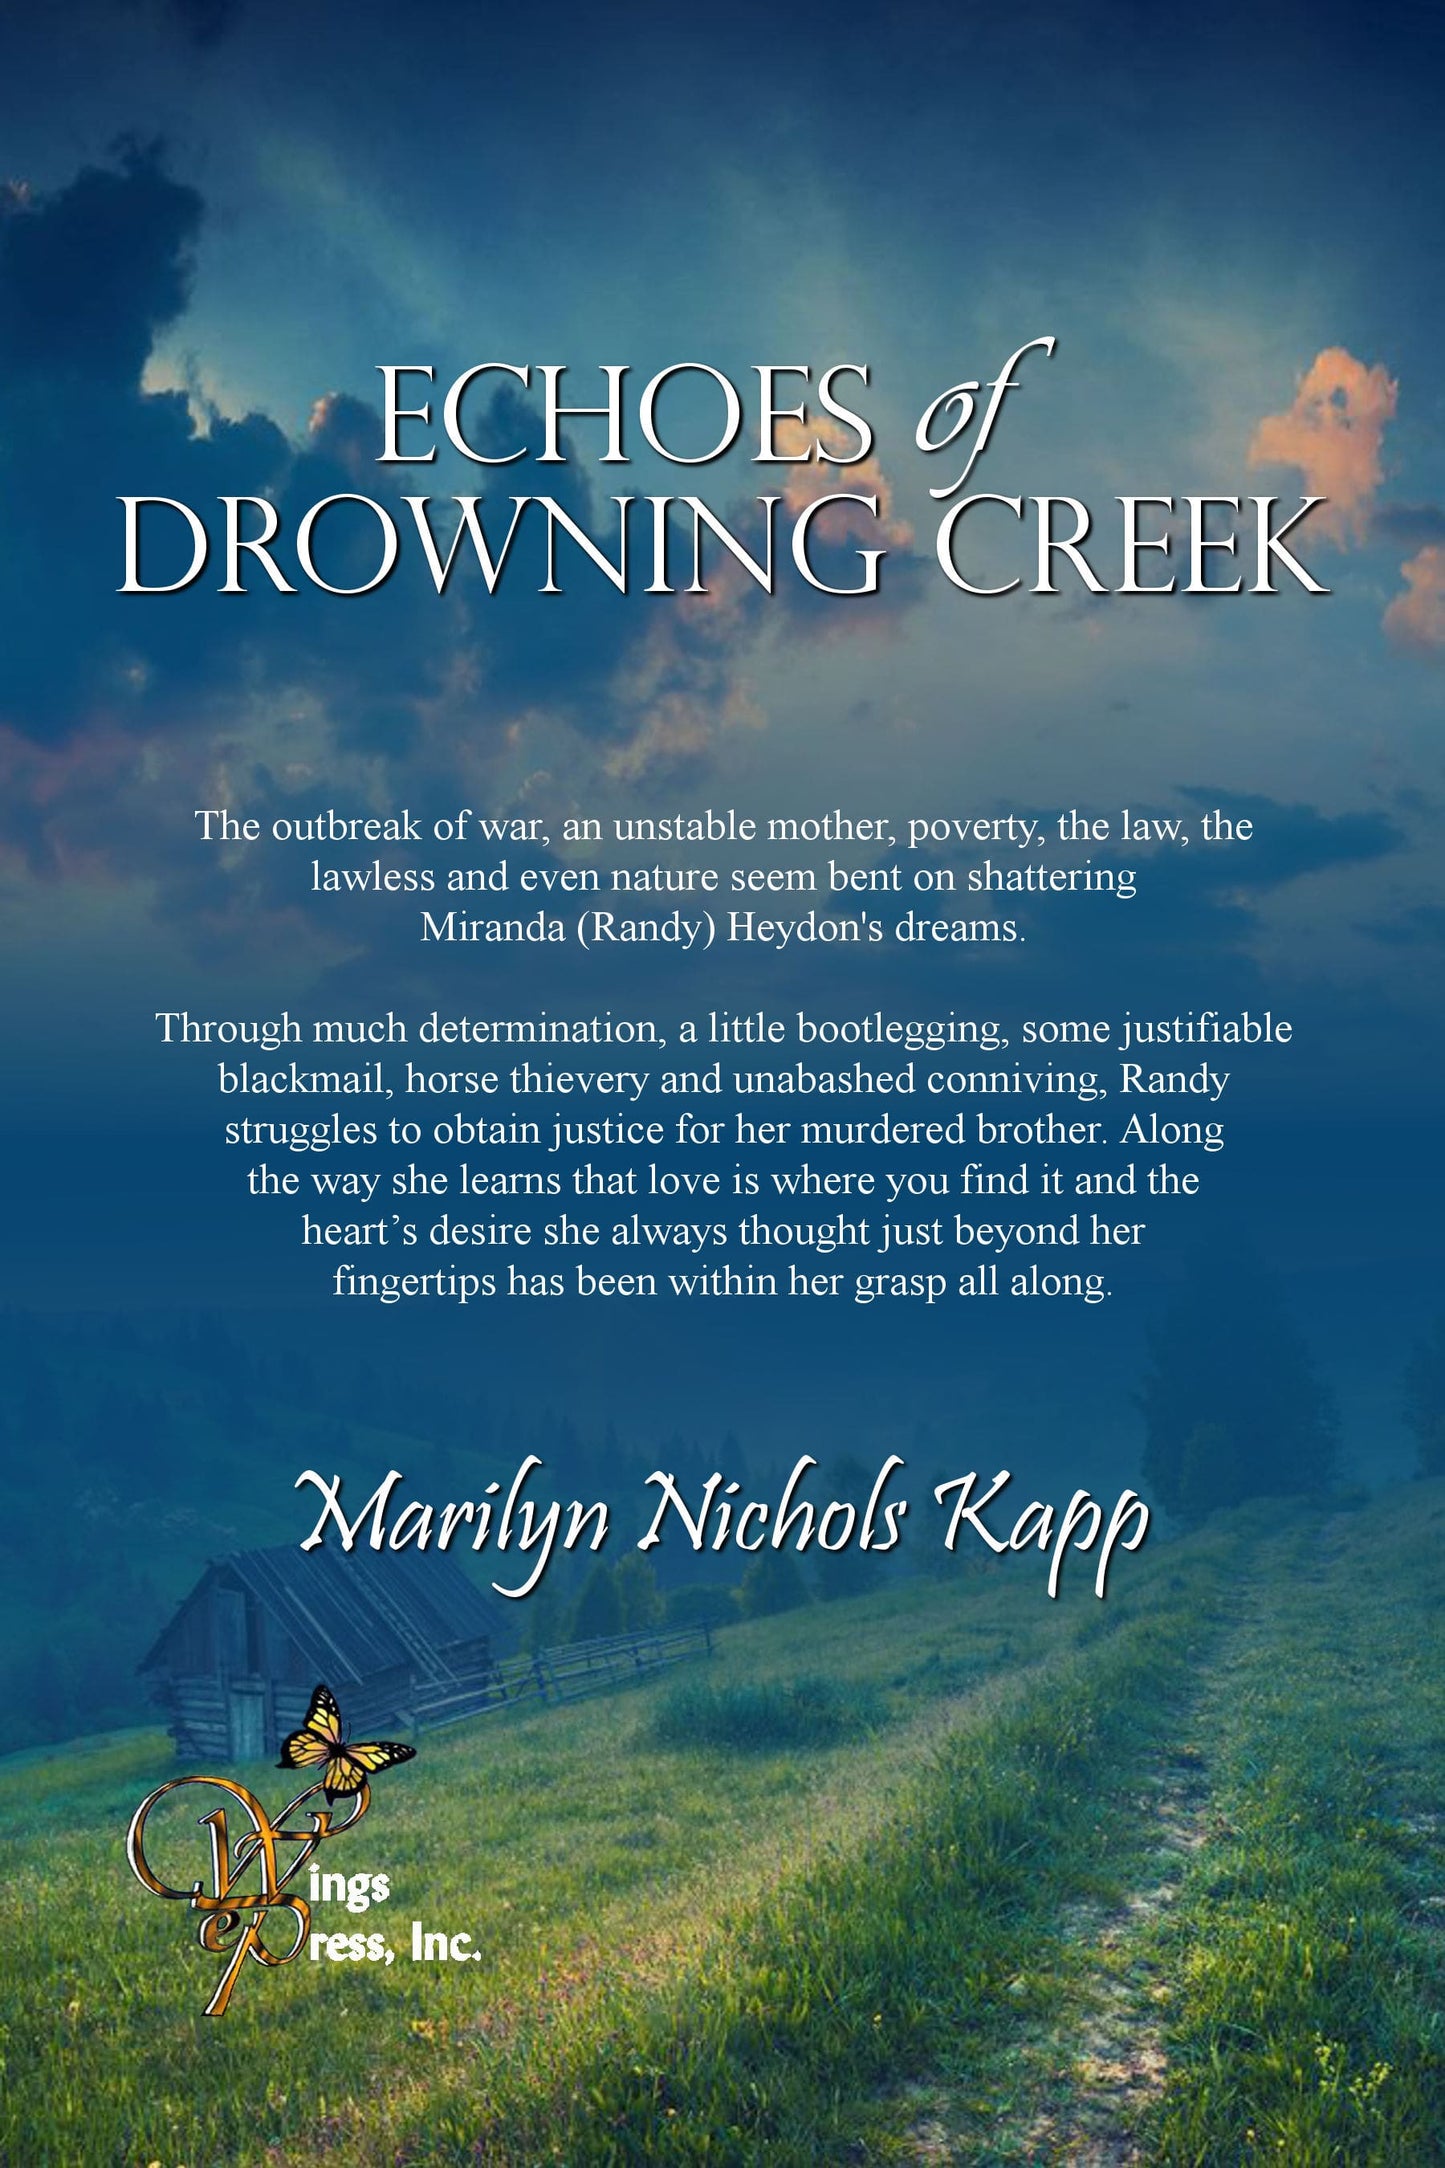 Echoes of Drowning Creek